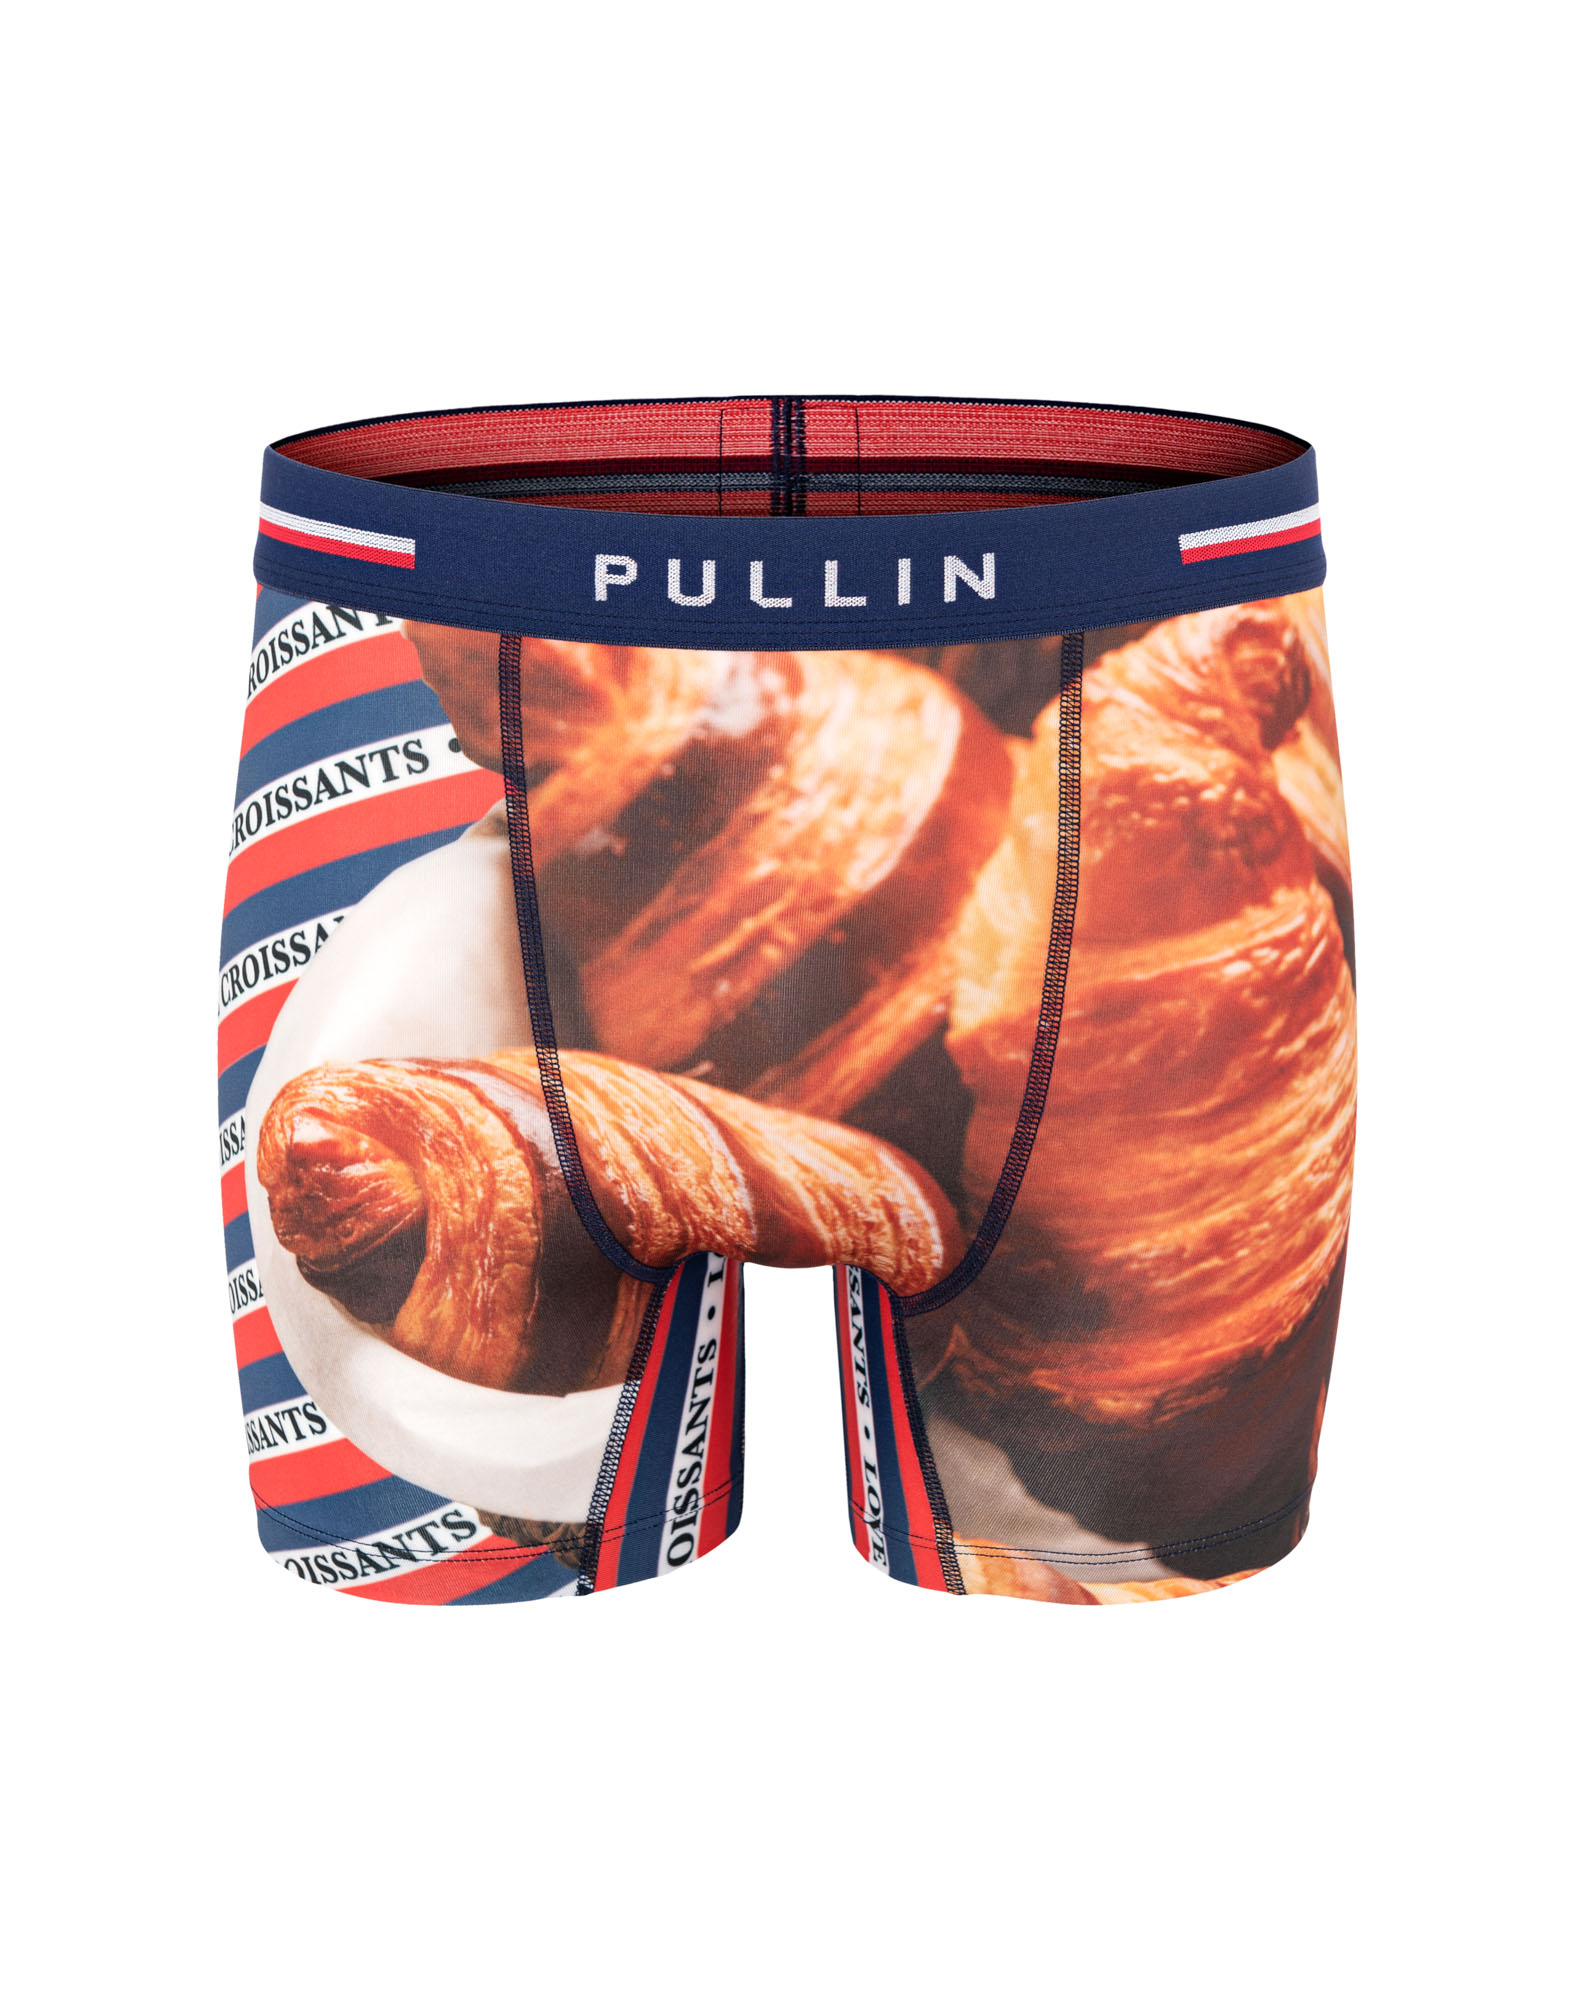 https://www.pull-in.com/media/catalog/product/f/a/fa2-lovecroissants-1.jpg